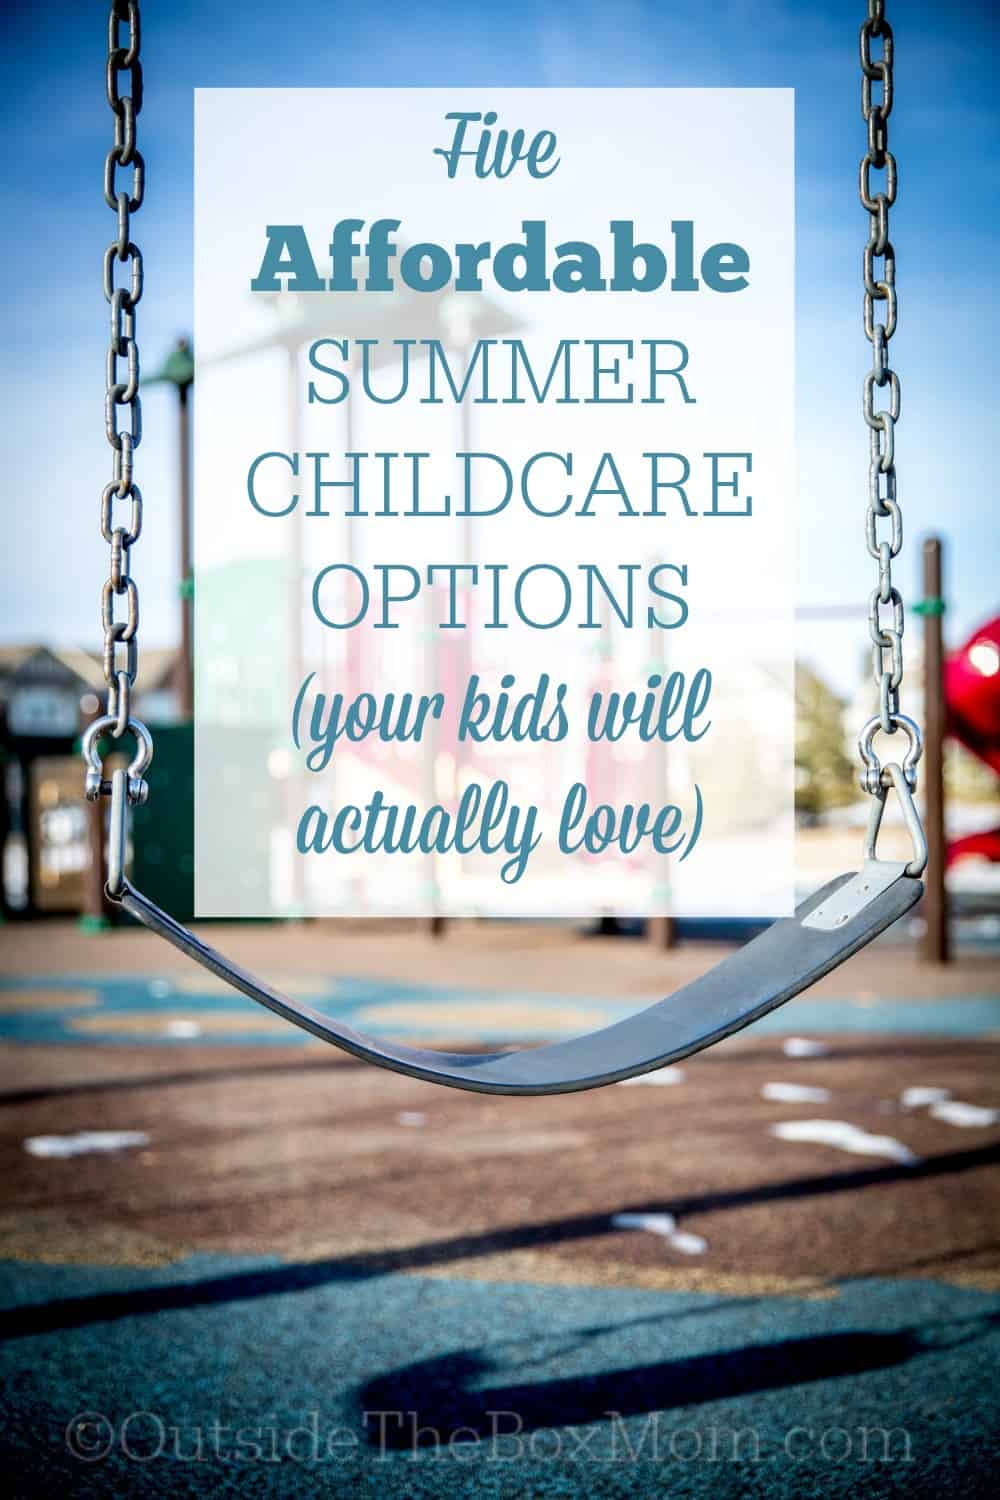 Summer brings the need for full-time childcare options, even for school-aged kids, unlike the school year. Cost, activities, duration, and fun are all factors of great Summer childcare options.